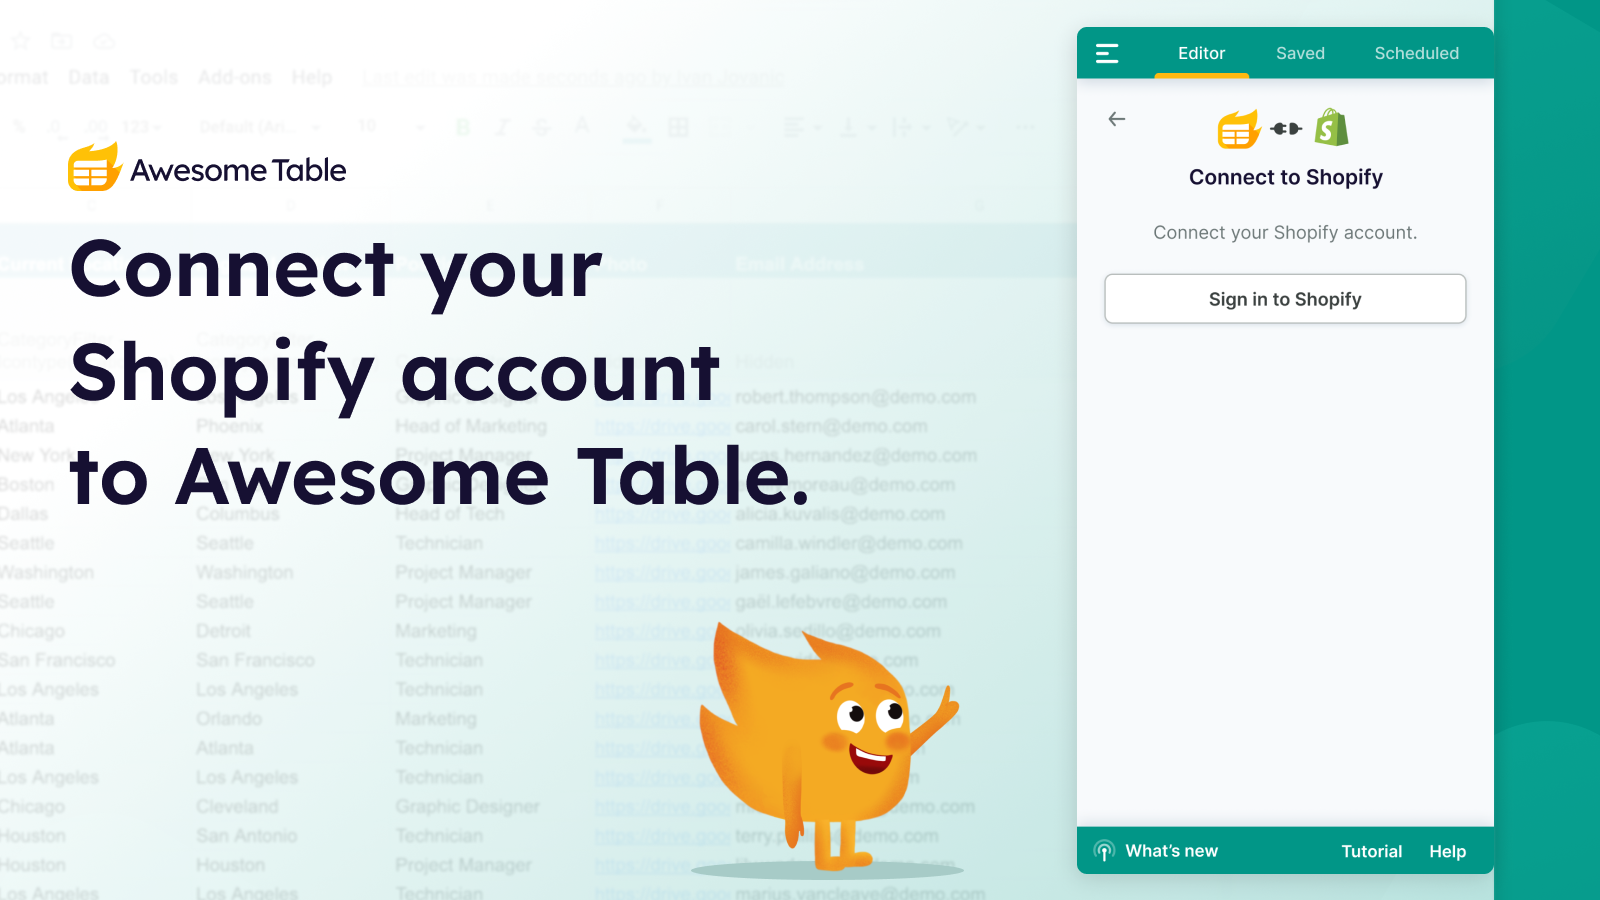 Connect your Shopify account to Awesome Table